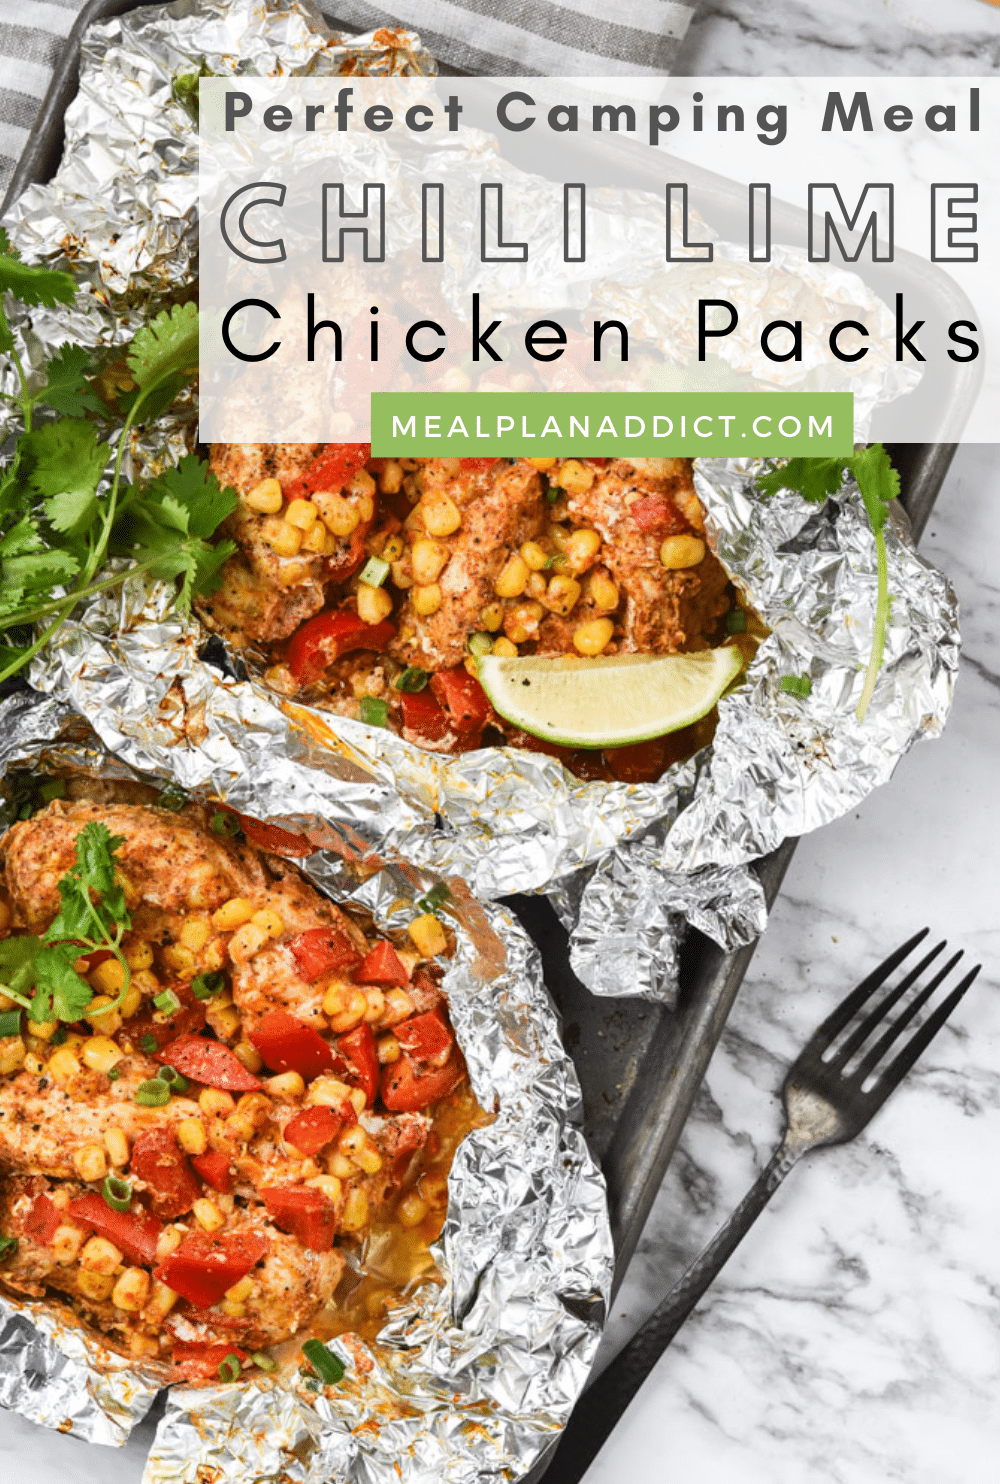 Perfect Camping Meal Chili Lime Chicken Foil Packs | Meal Plan Addict